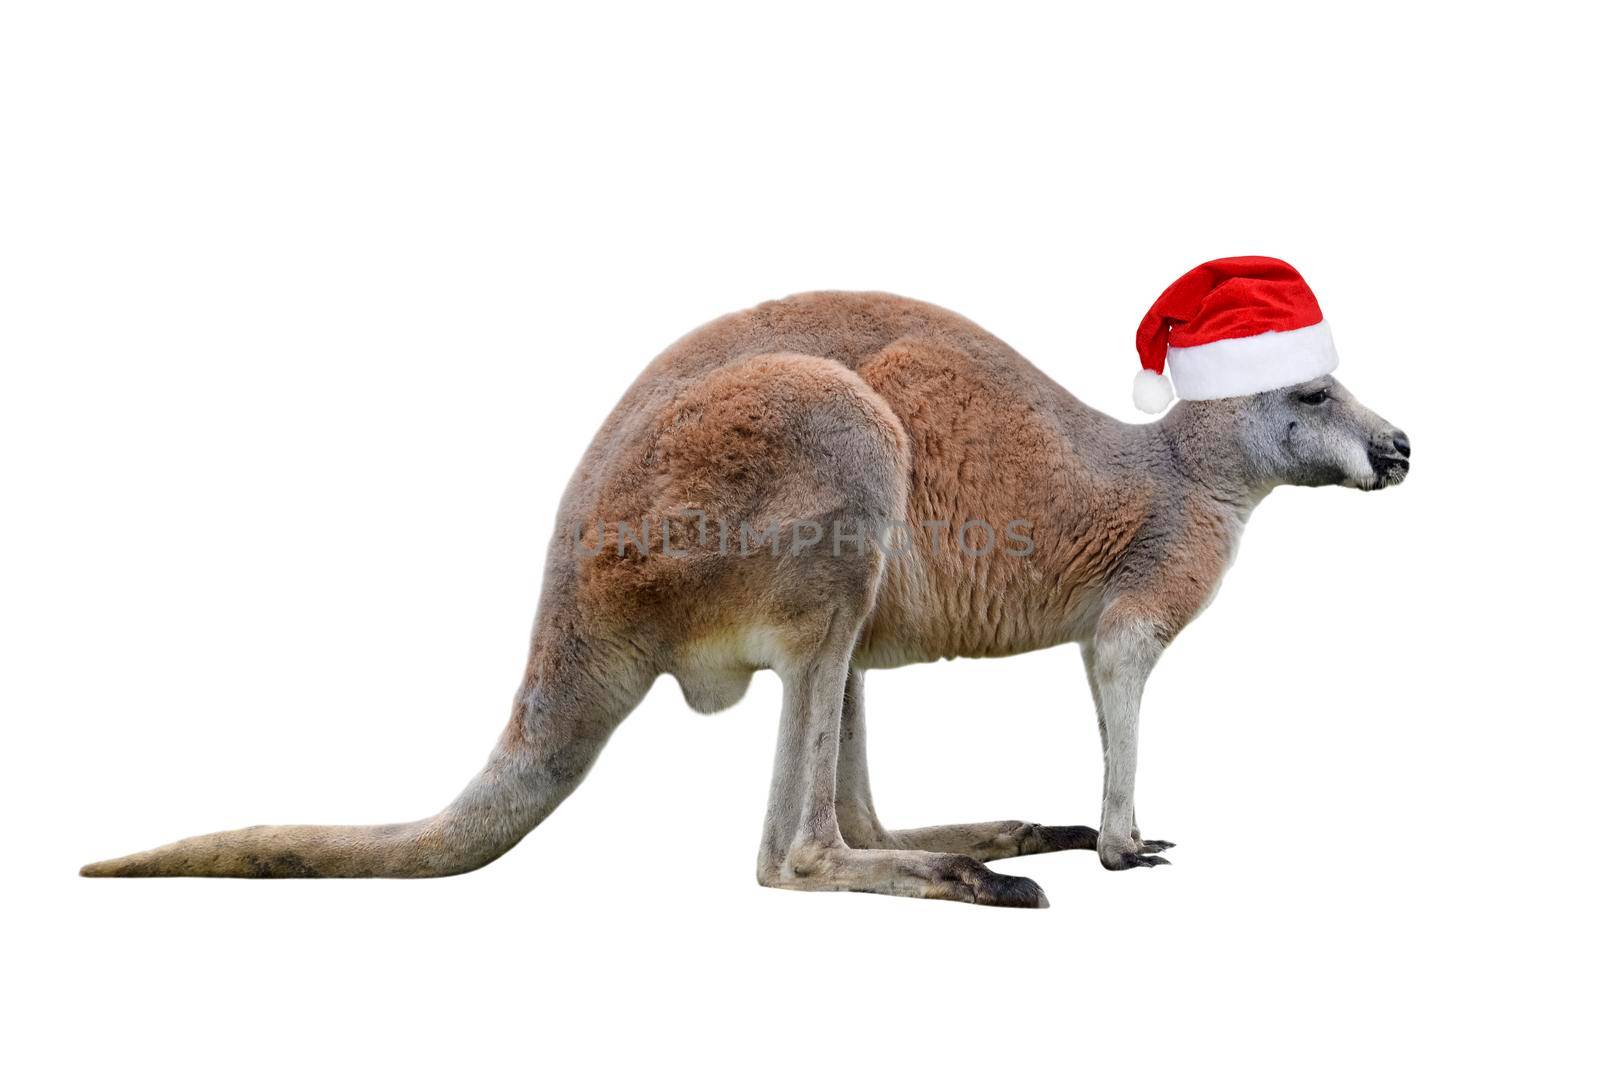 Male kangaroo in Christmas hat isolated on white background. Big kangaroo full lengths, front view. The kangaroo is a marsupial from the family Macropodidae.